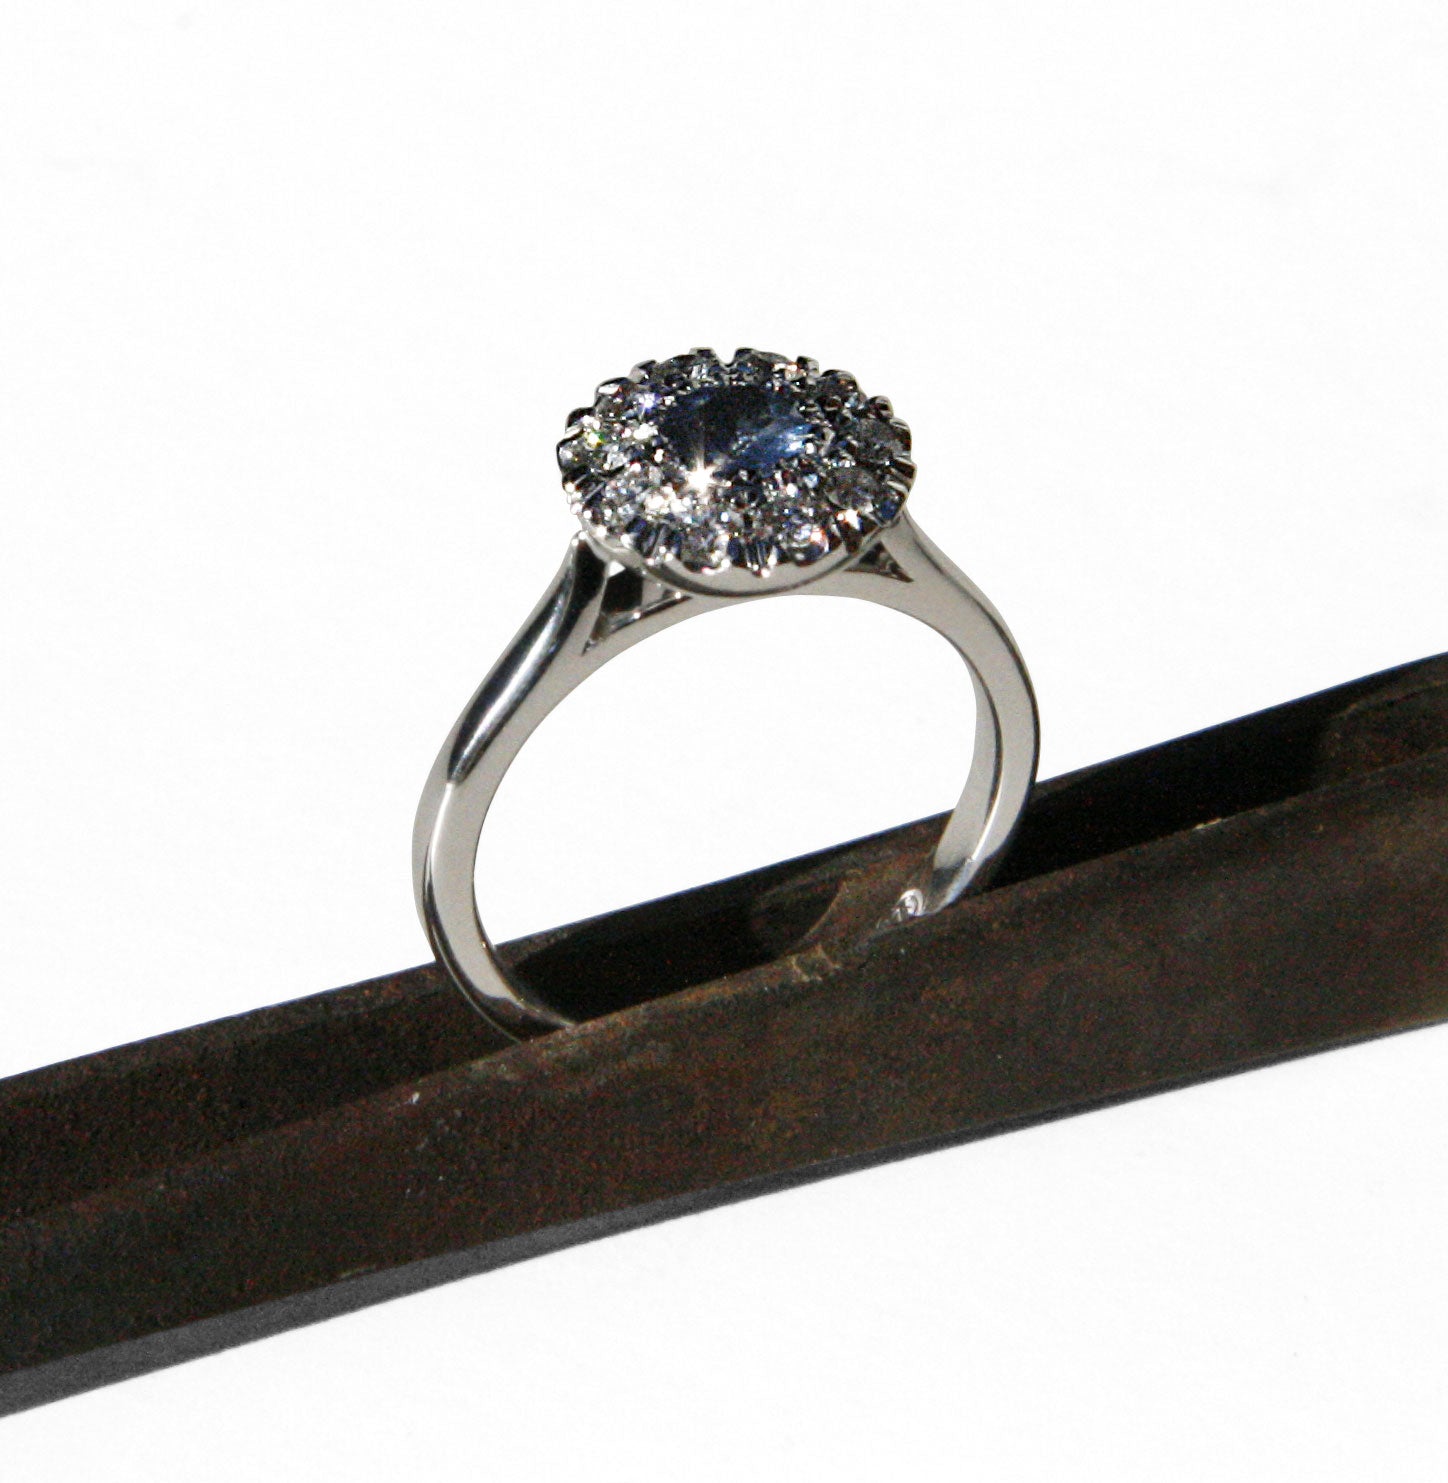 Sapphire and diamond 'button' engagement ring